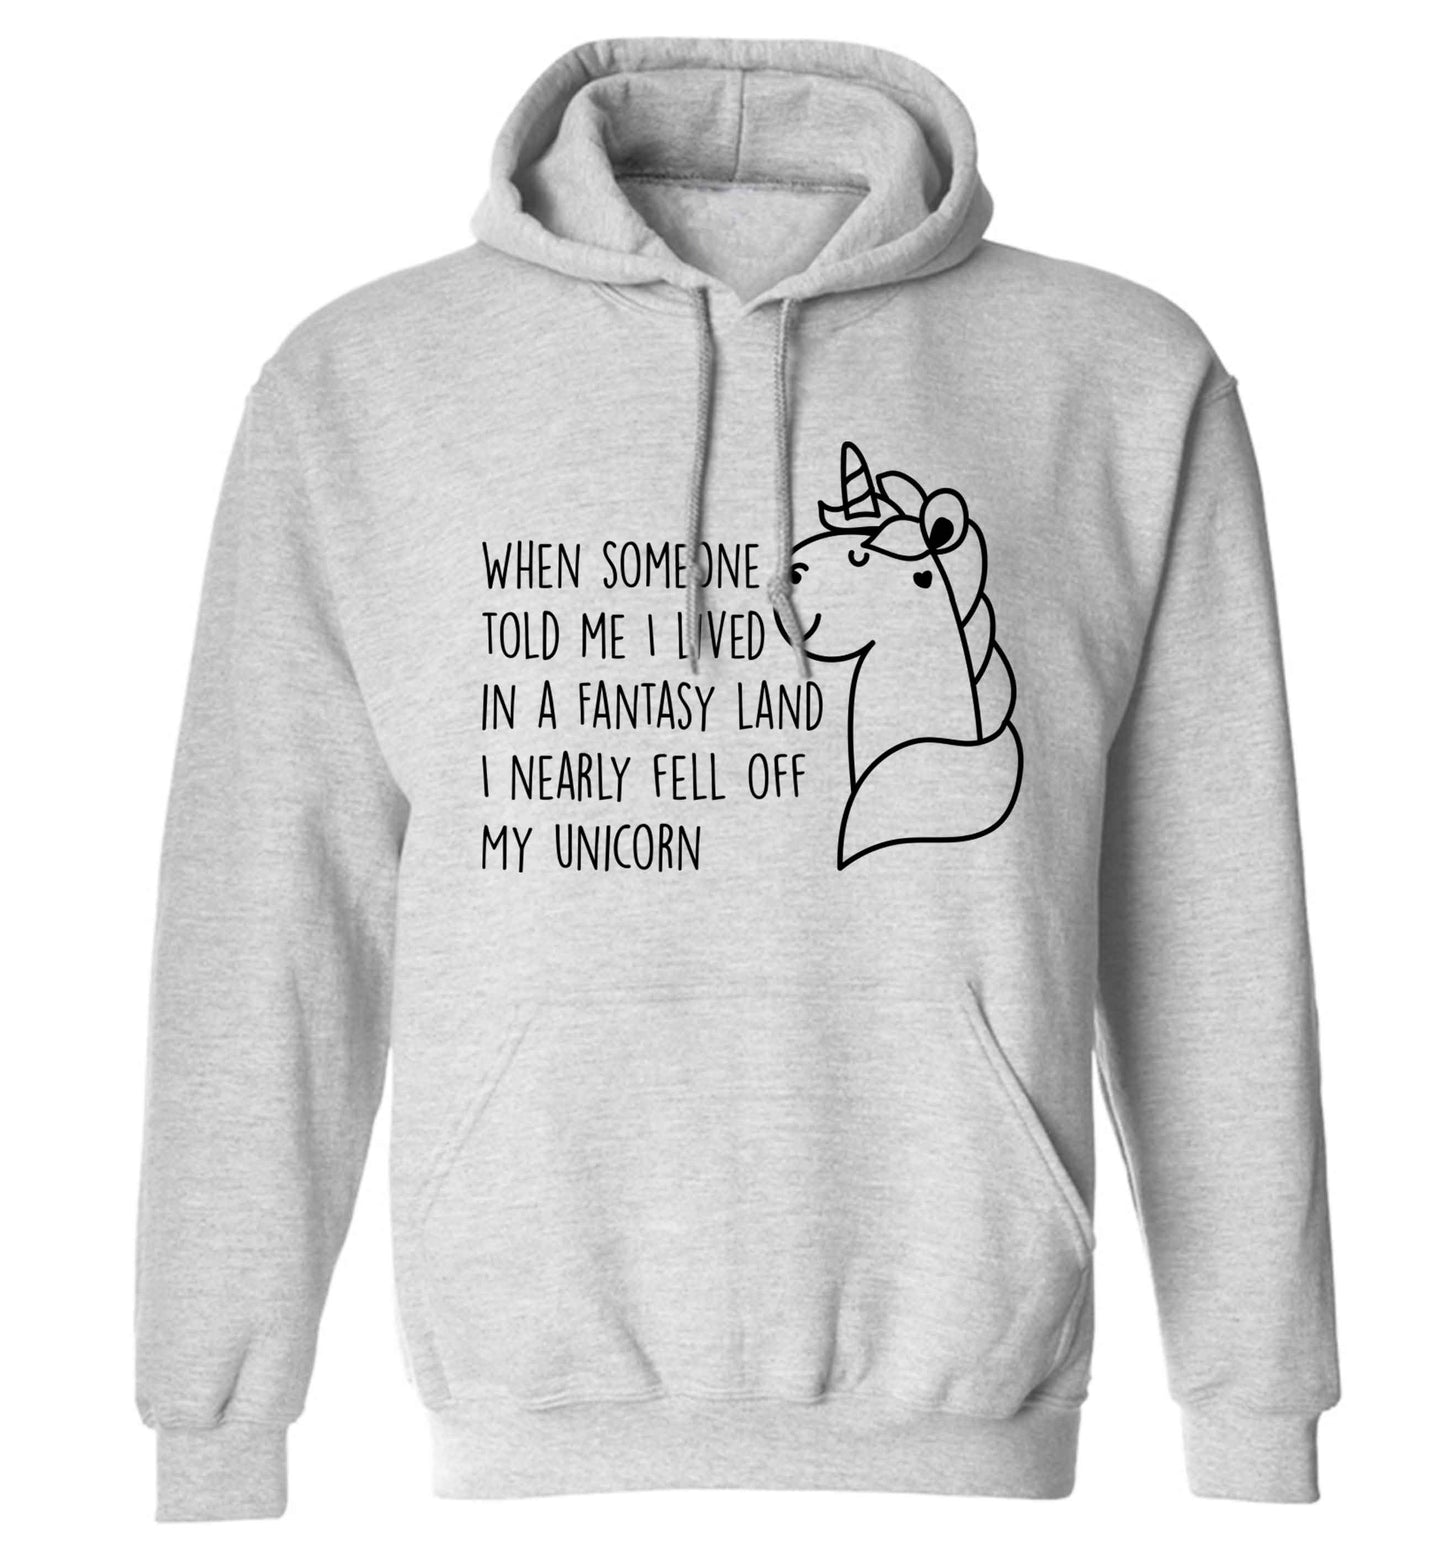 When somebody told me I lived in a fantasy land I nearly fell of my unicorn adults unisex grey hoodie 2XL